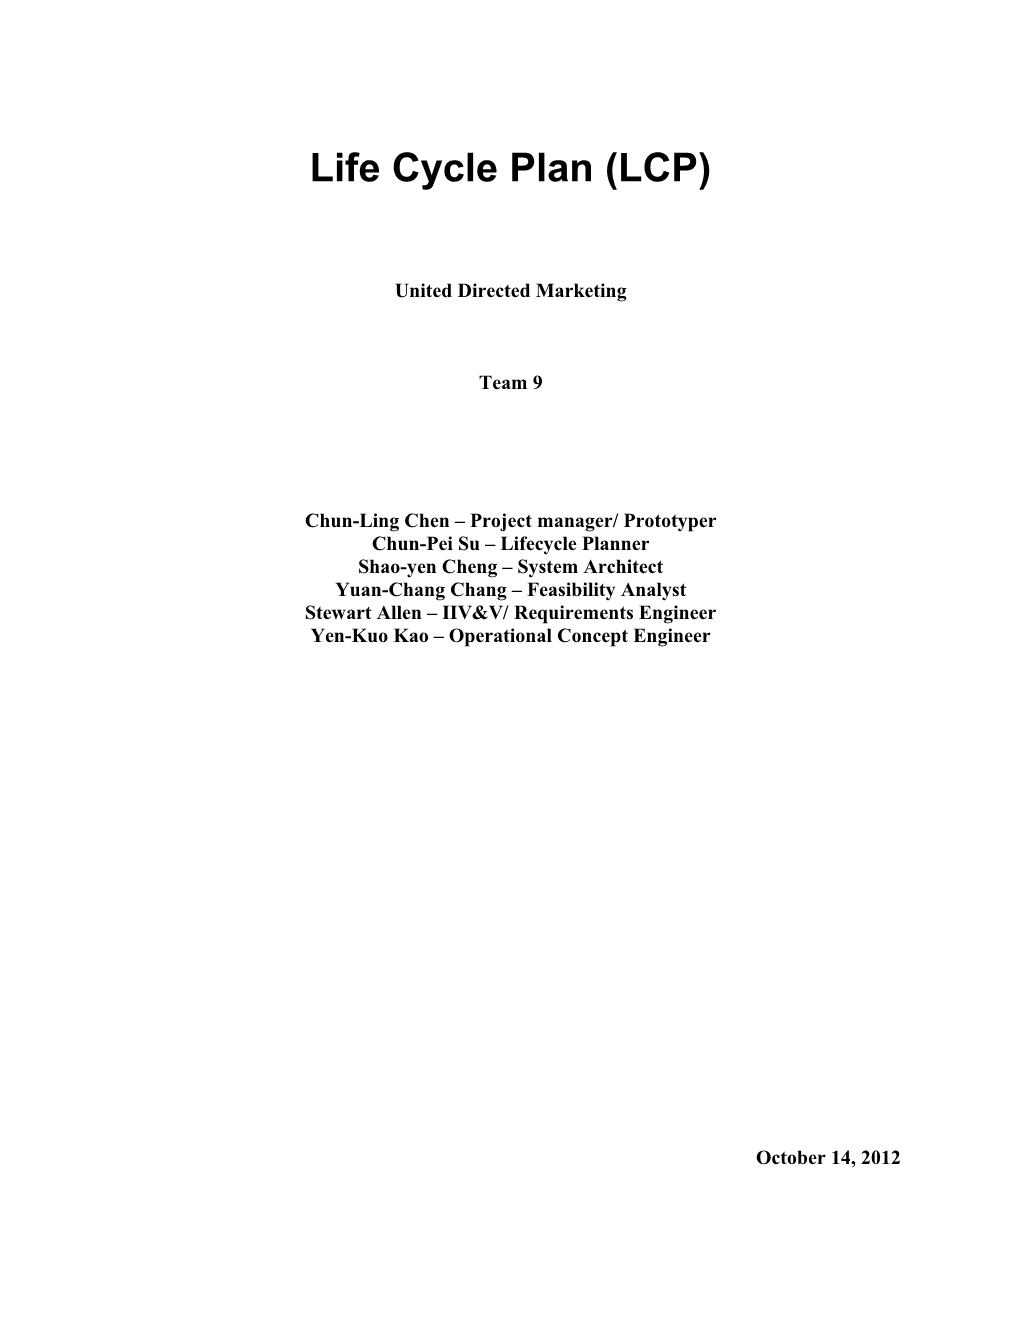 Life Cycle Plan (LCP) s7